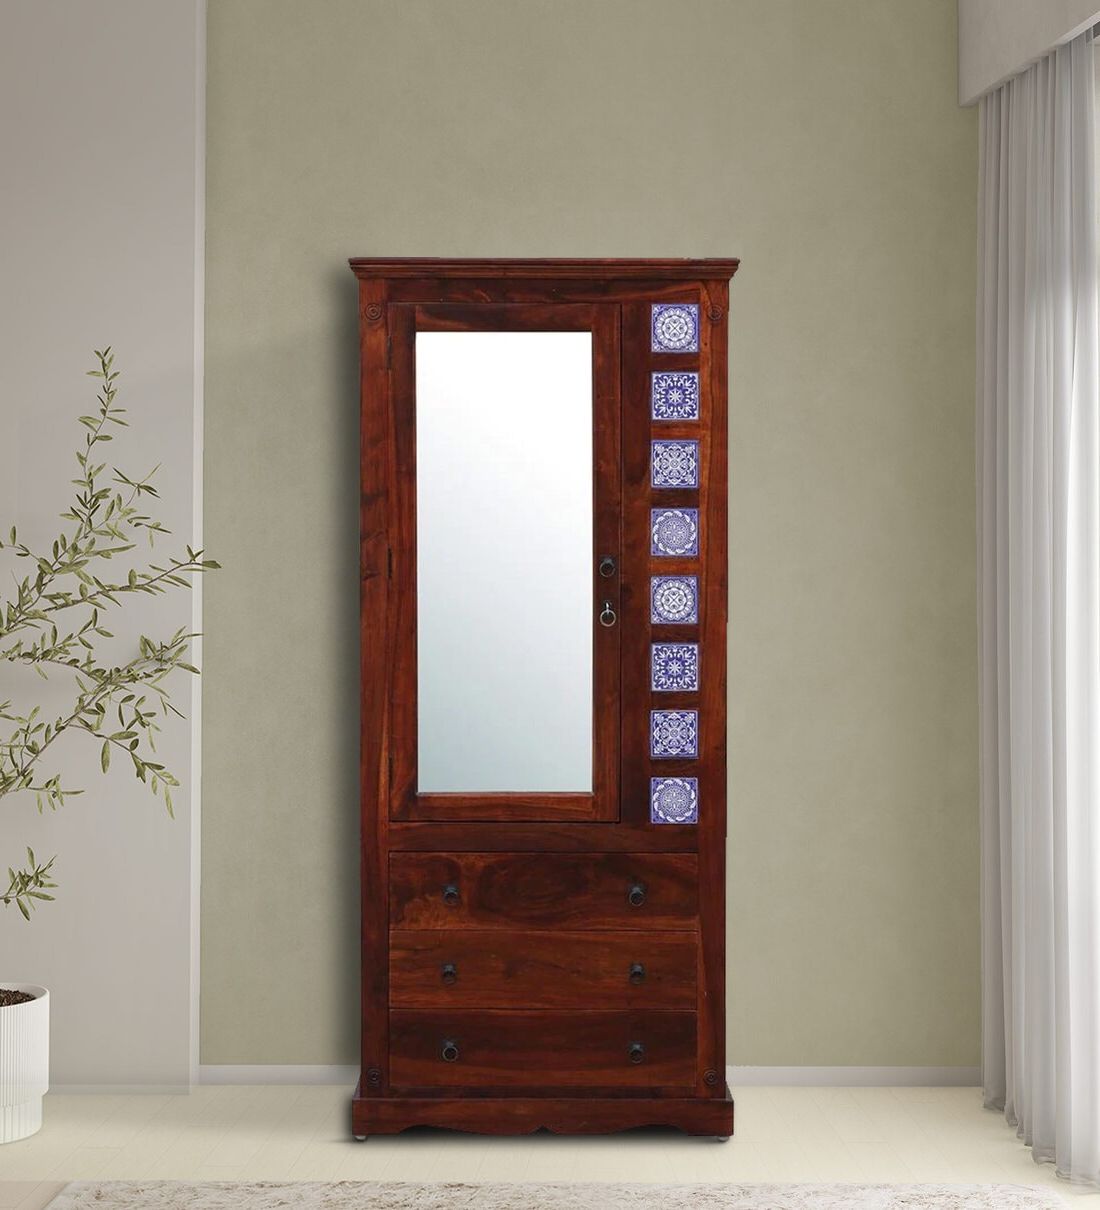 Buy Kamchini Sheesham Wood Single Door Wardrobe In Scratch Resistant Honey  Oak Finish With Mirror At 1% Offmudramark From Pepperfry | Pepperfry In One Door Wardrobes With Mirror (View 11 of 20)